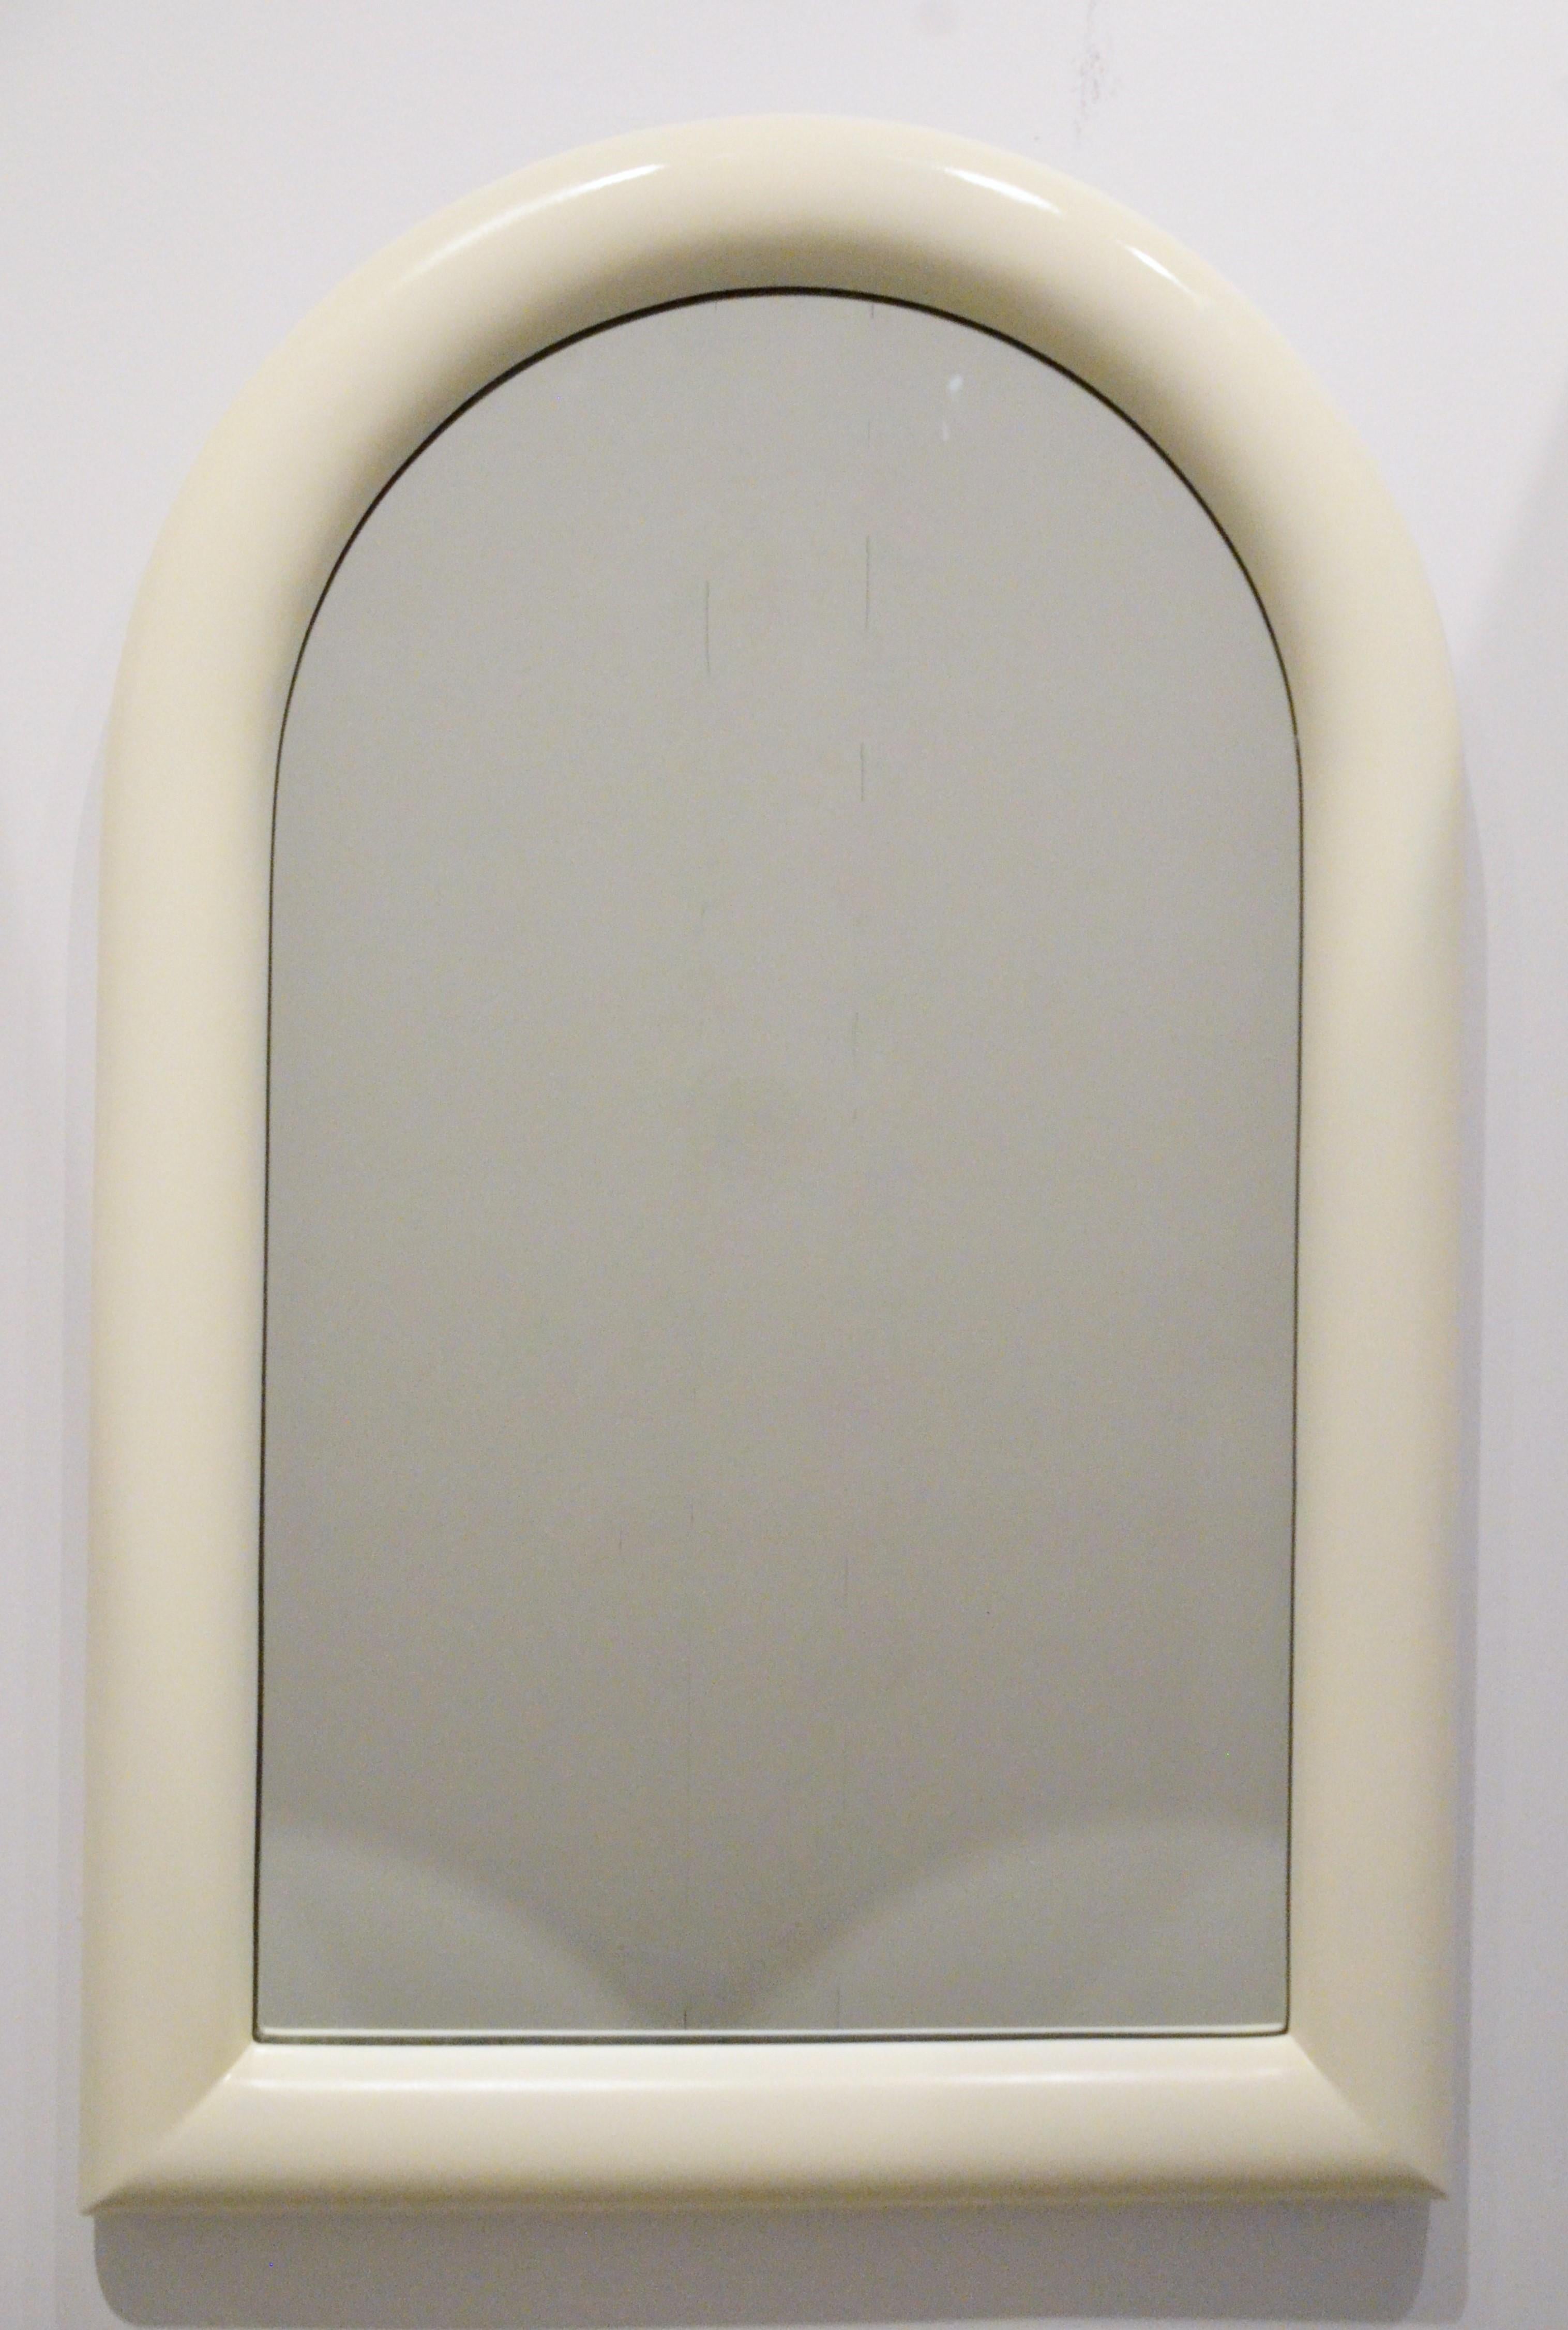 Offered is a Mid-Century Modern Pierre Cardin attributed arched topped wall mirror newly lacquered in a creamy white wood frame. Pierre Cardin's signature style of futuristic forms combined with traditional finishes are echoed in this piece. This